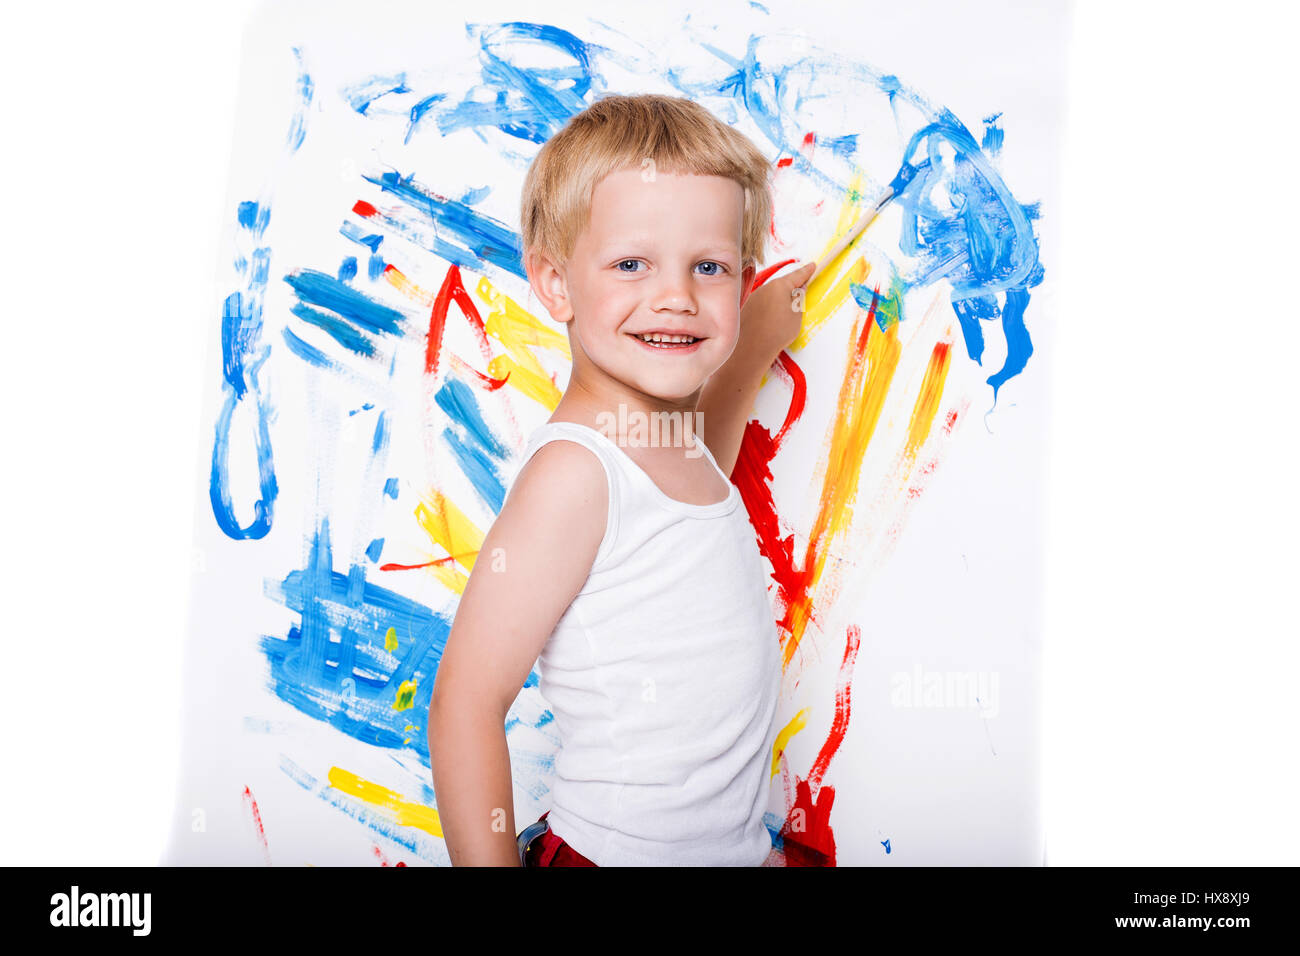 Little messy kid painting with paintbrush picture on easel. Education. Creativity. School. Preschool. Studio portrait over white background Stock Photo